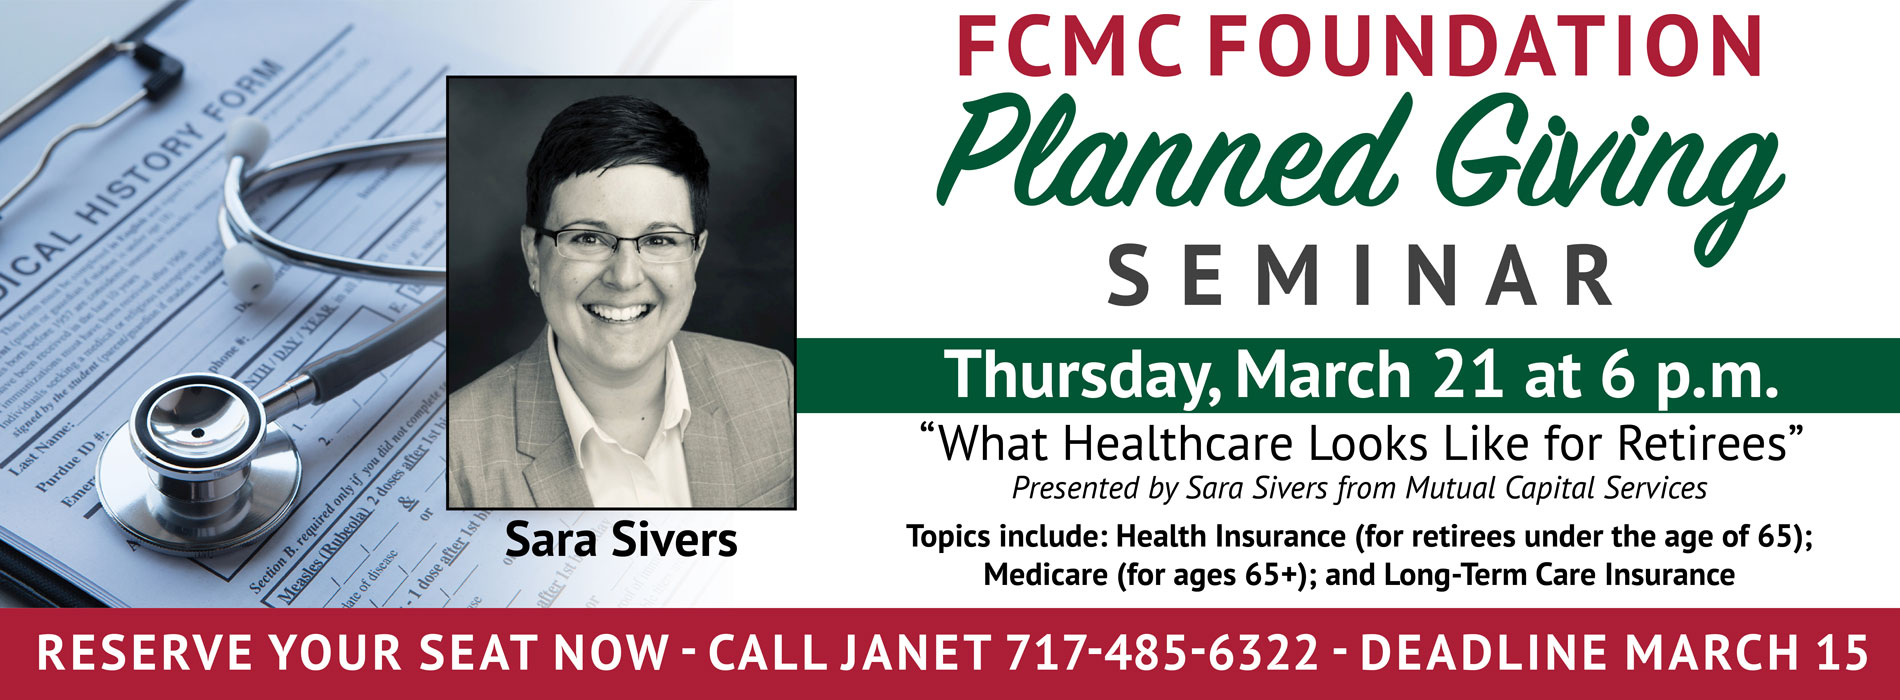 FCMC Foundation Planned Giving Seminar

Thursday, March 21 at 6pm

"What Healthcare Looks Like for Retirees"